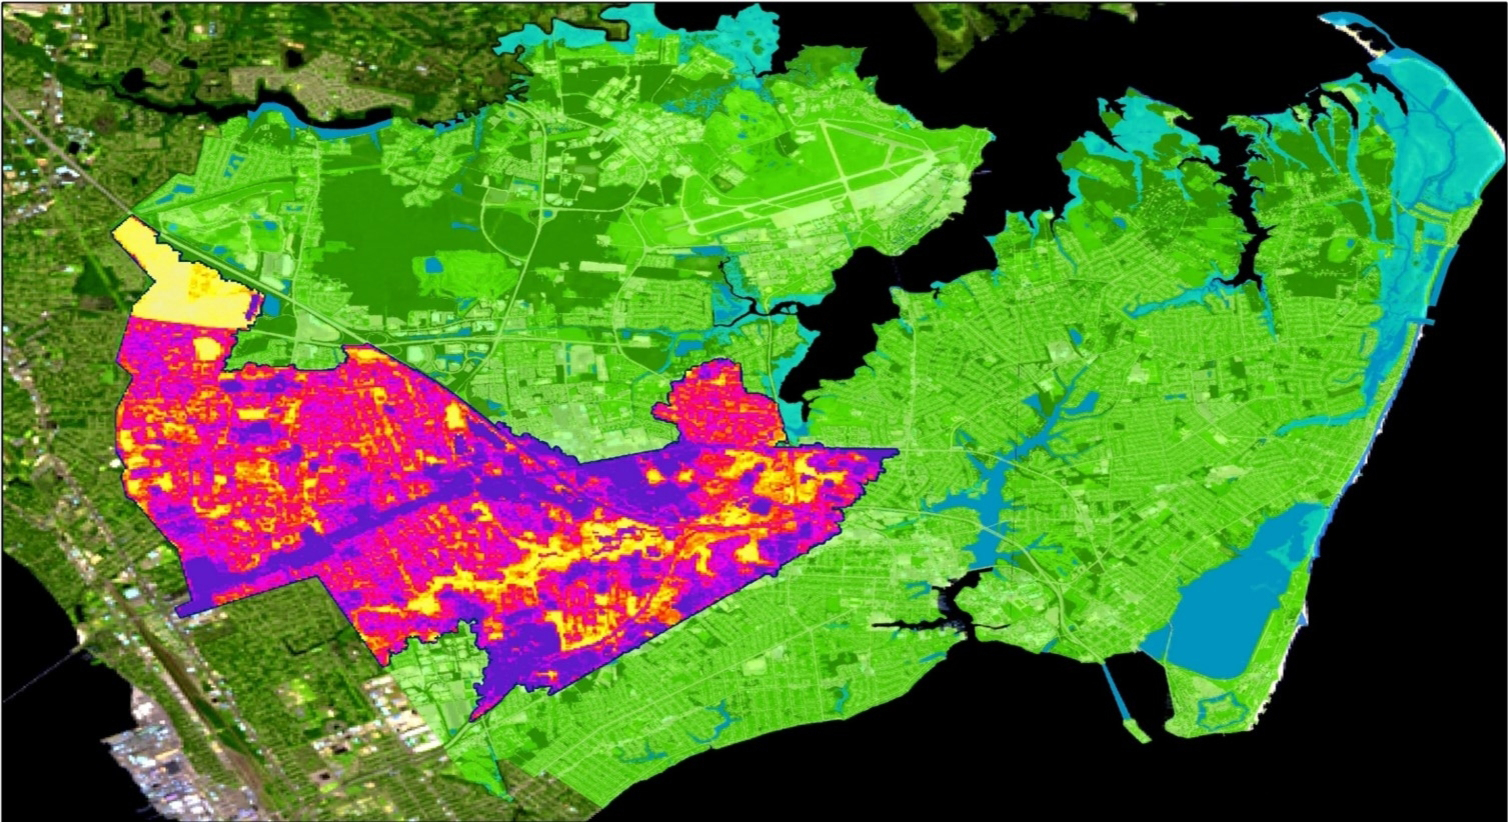 This image includes a false color composite of Landsat 5 TM imagery (August 8 to 16, 2011), high-resolution classified imagery from the City of Hampton (January 2018), and percent tree canopy cover from regression analysis for the Hampton Roads peninsula in Virginia. The yellow represents high tree canopy cover (80 to 100%) and the dark purple represents low cover (0 to 10%). Percent tree canopy cover allows for the City to visualize areas for improvement.